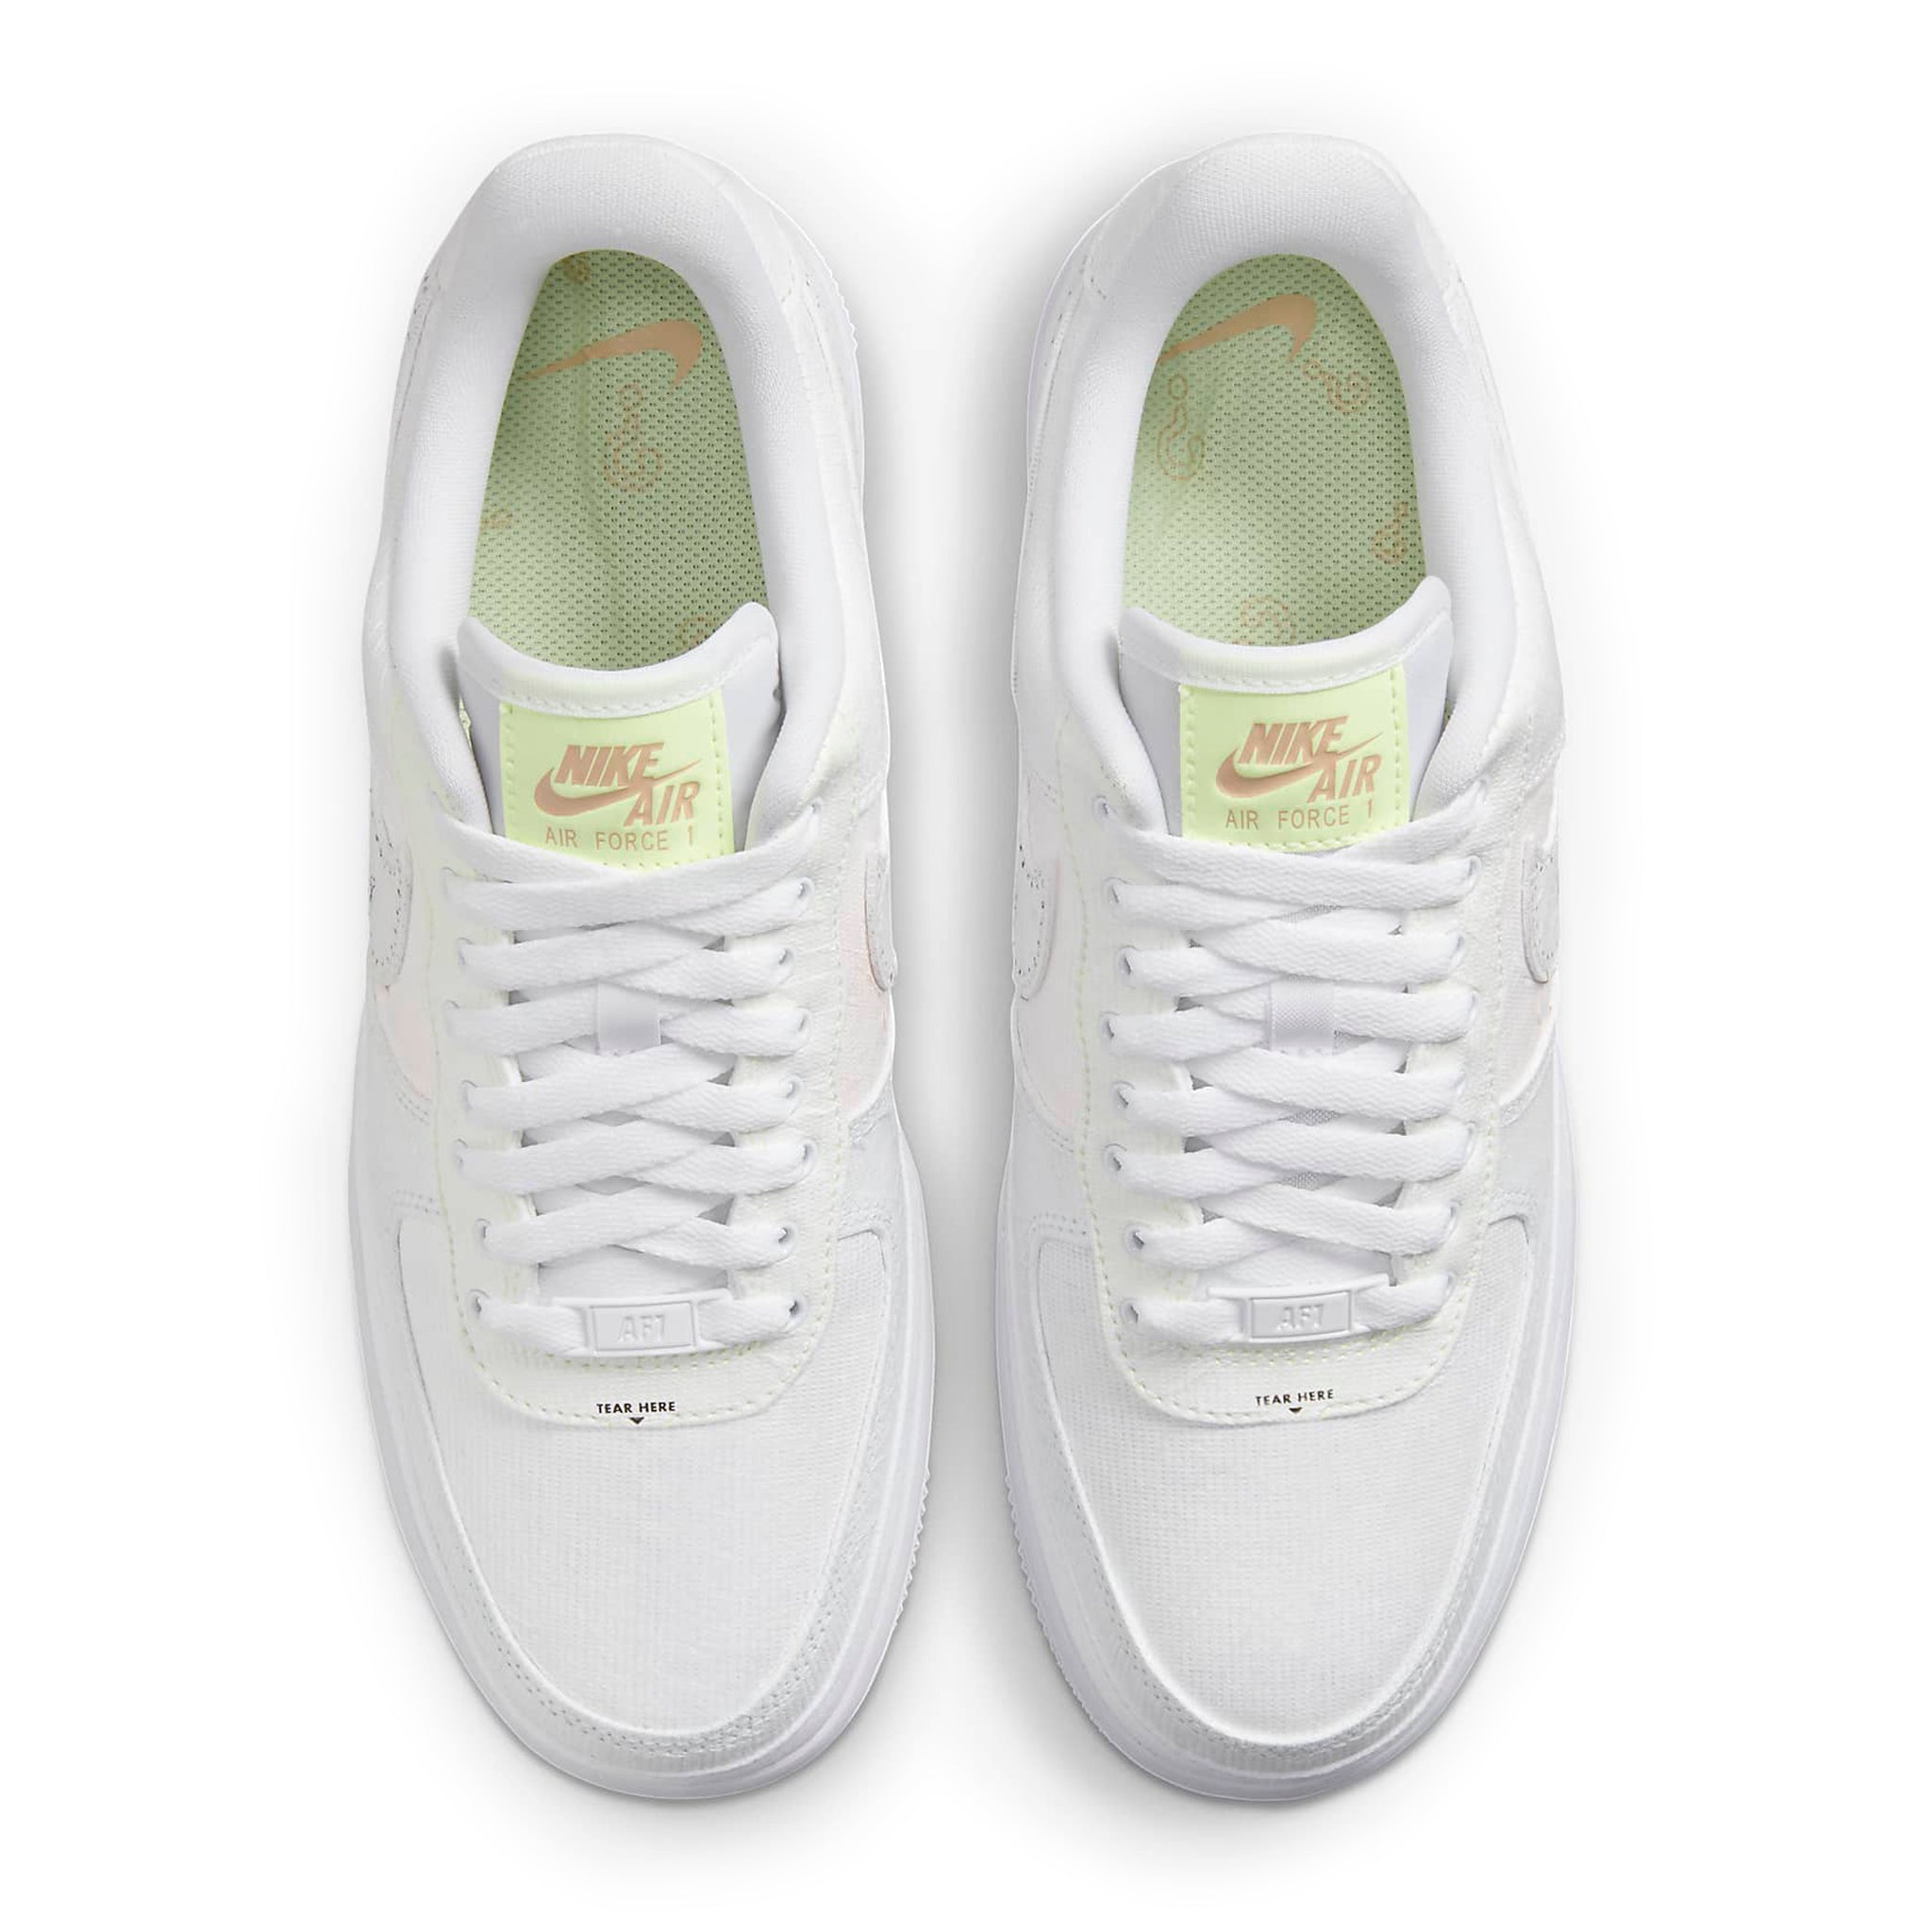 Top down view of Nike Air Force 1 Low Tear Away Arctic Punch (W) DJ6901-600